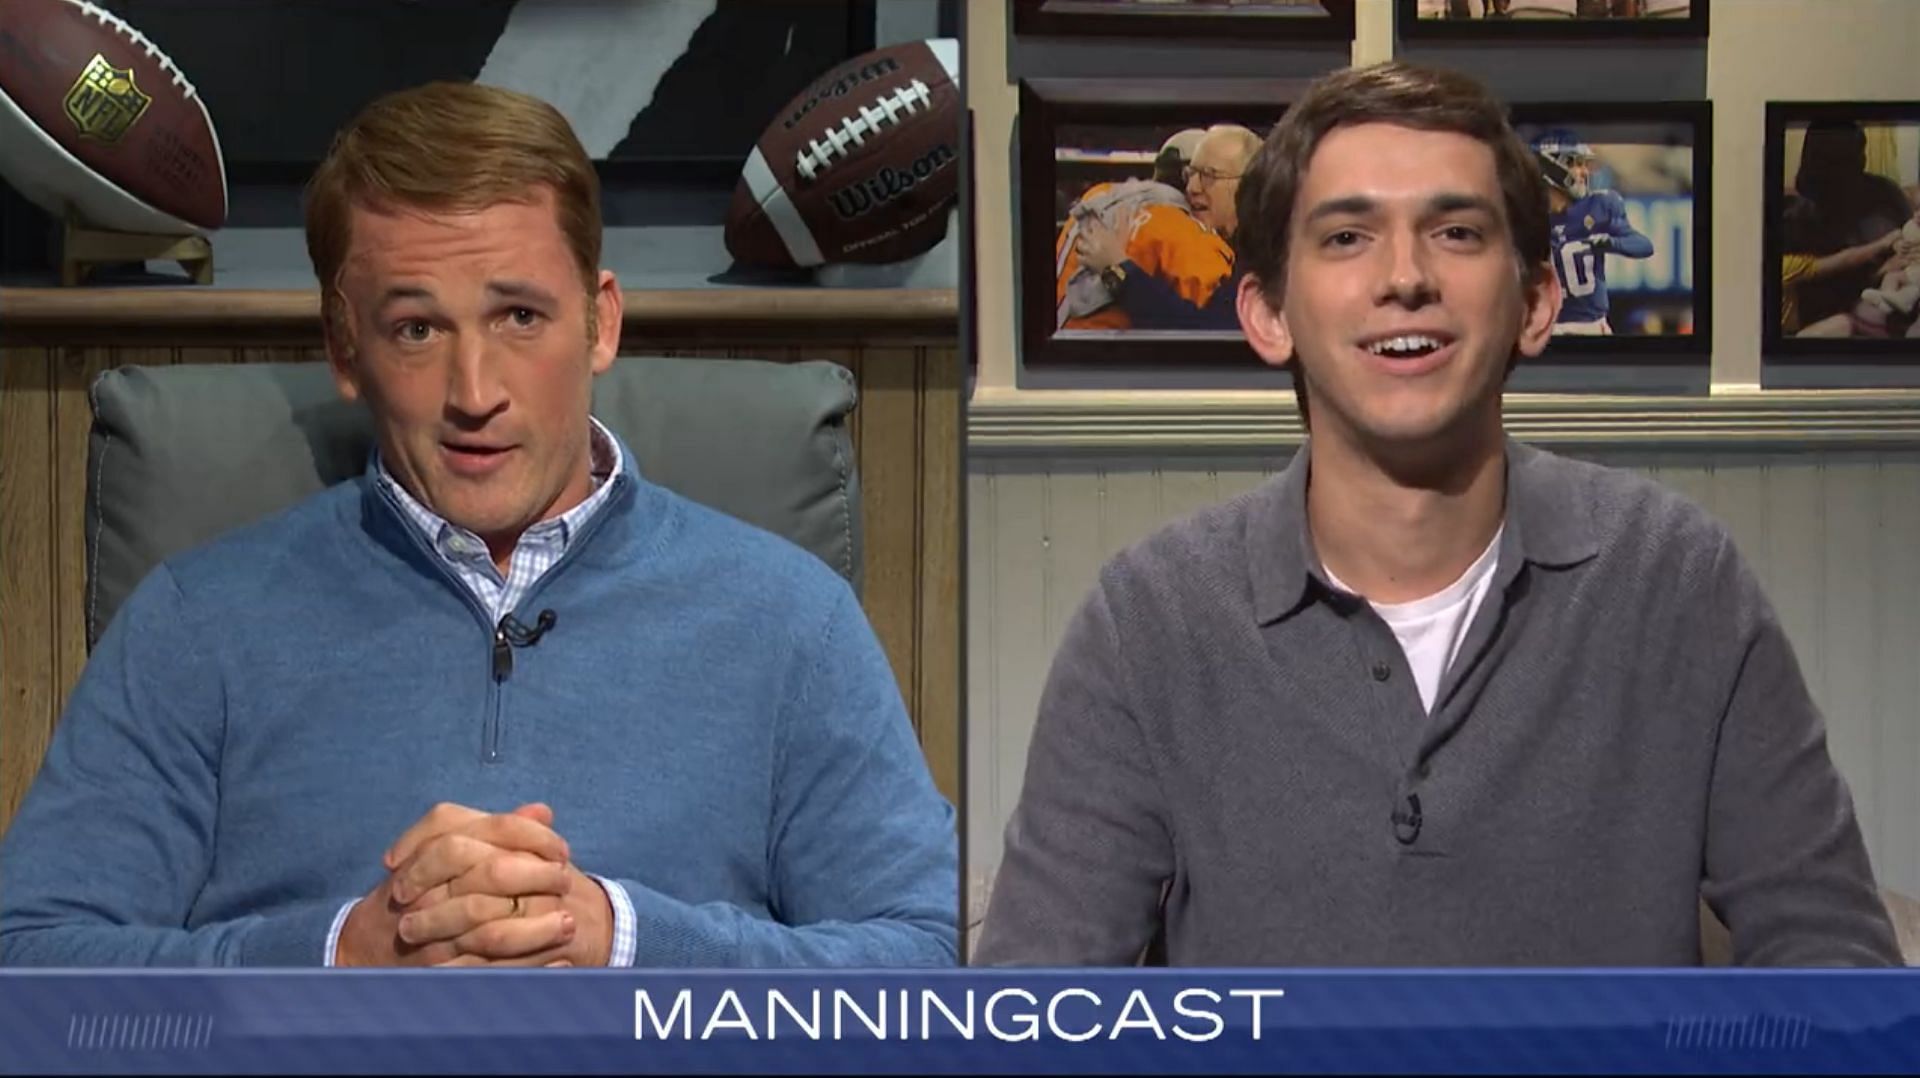 Miles Teller and Andrew Dismukes, as the Manning brothers, ripped apart SNL in their expert dissection during cold open (Image via NBC)